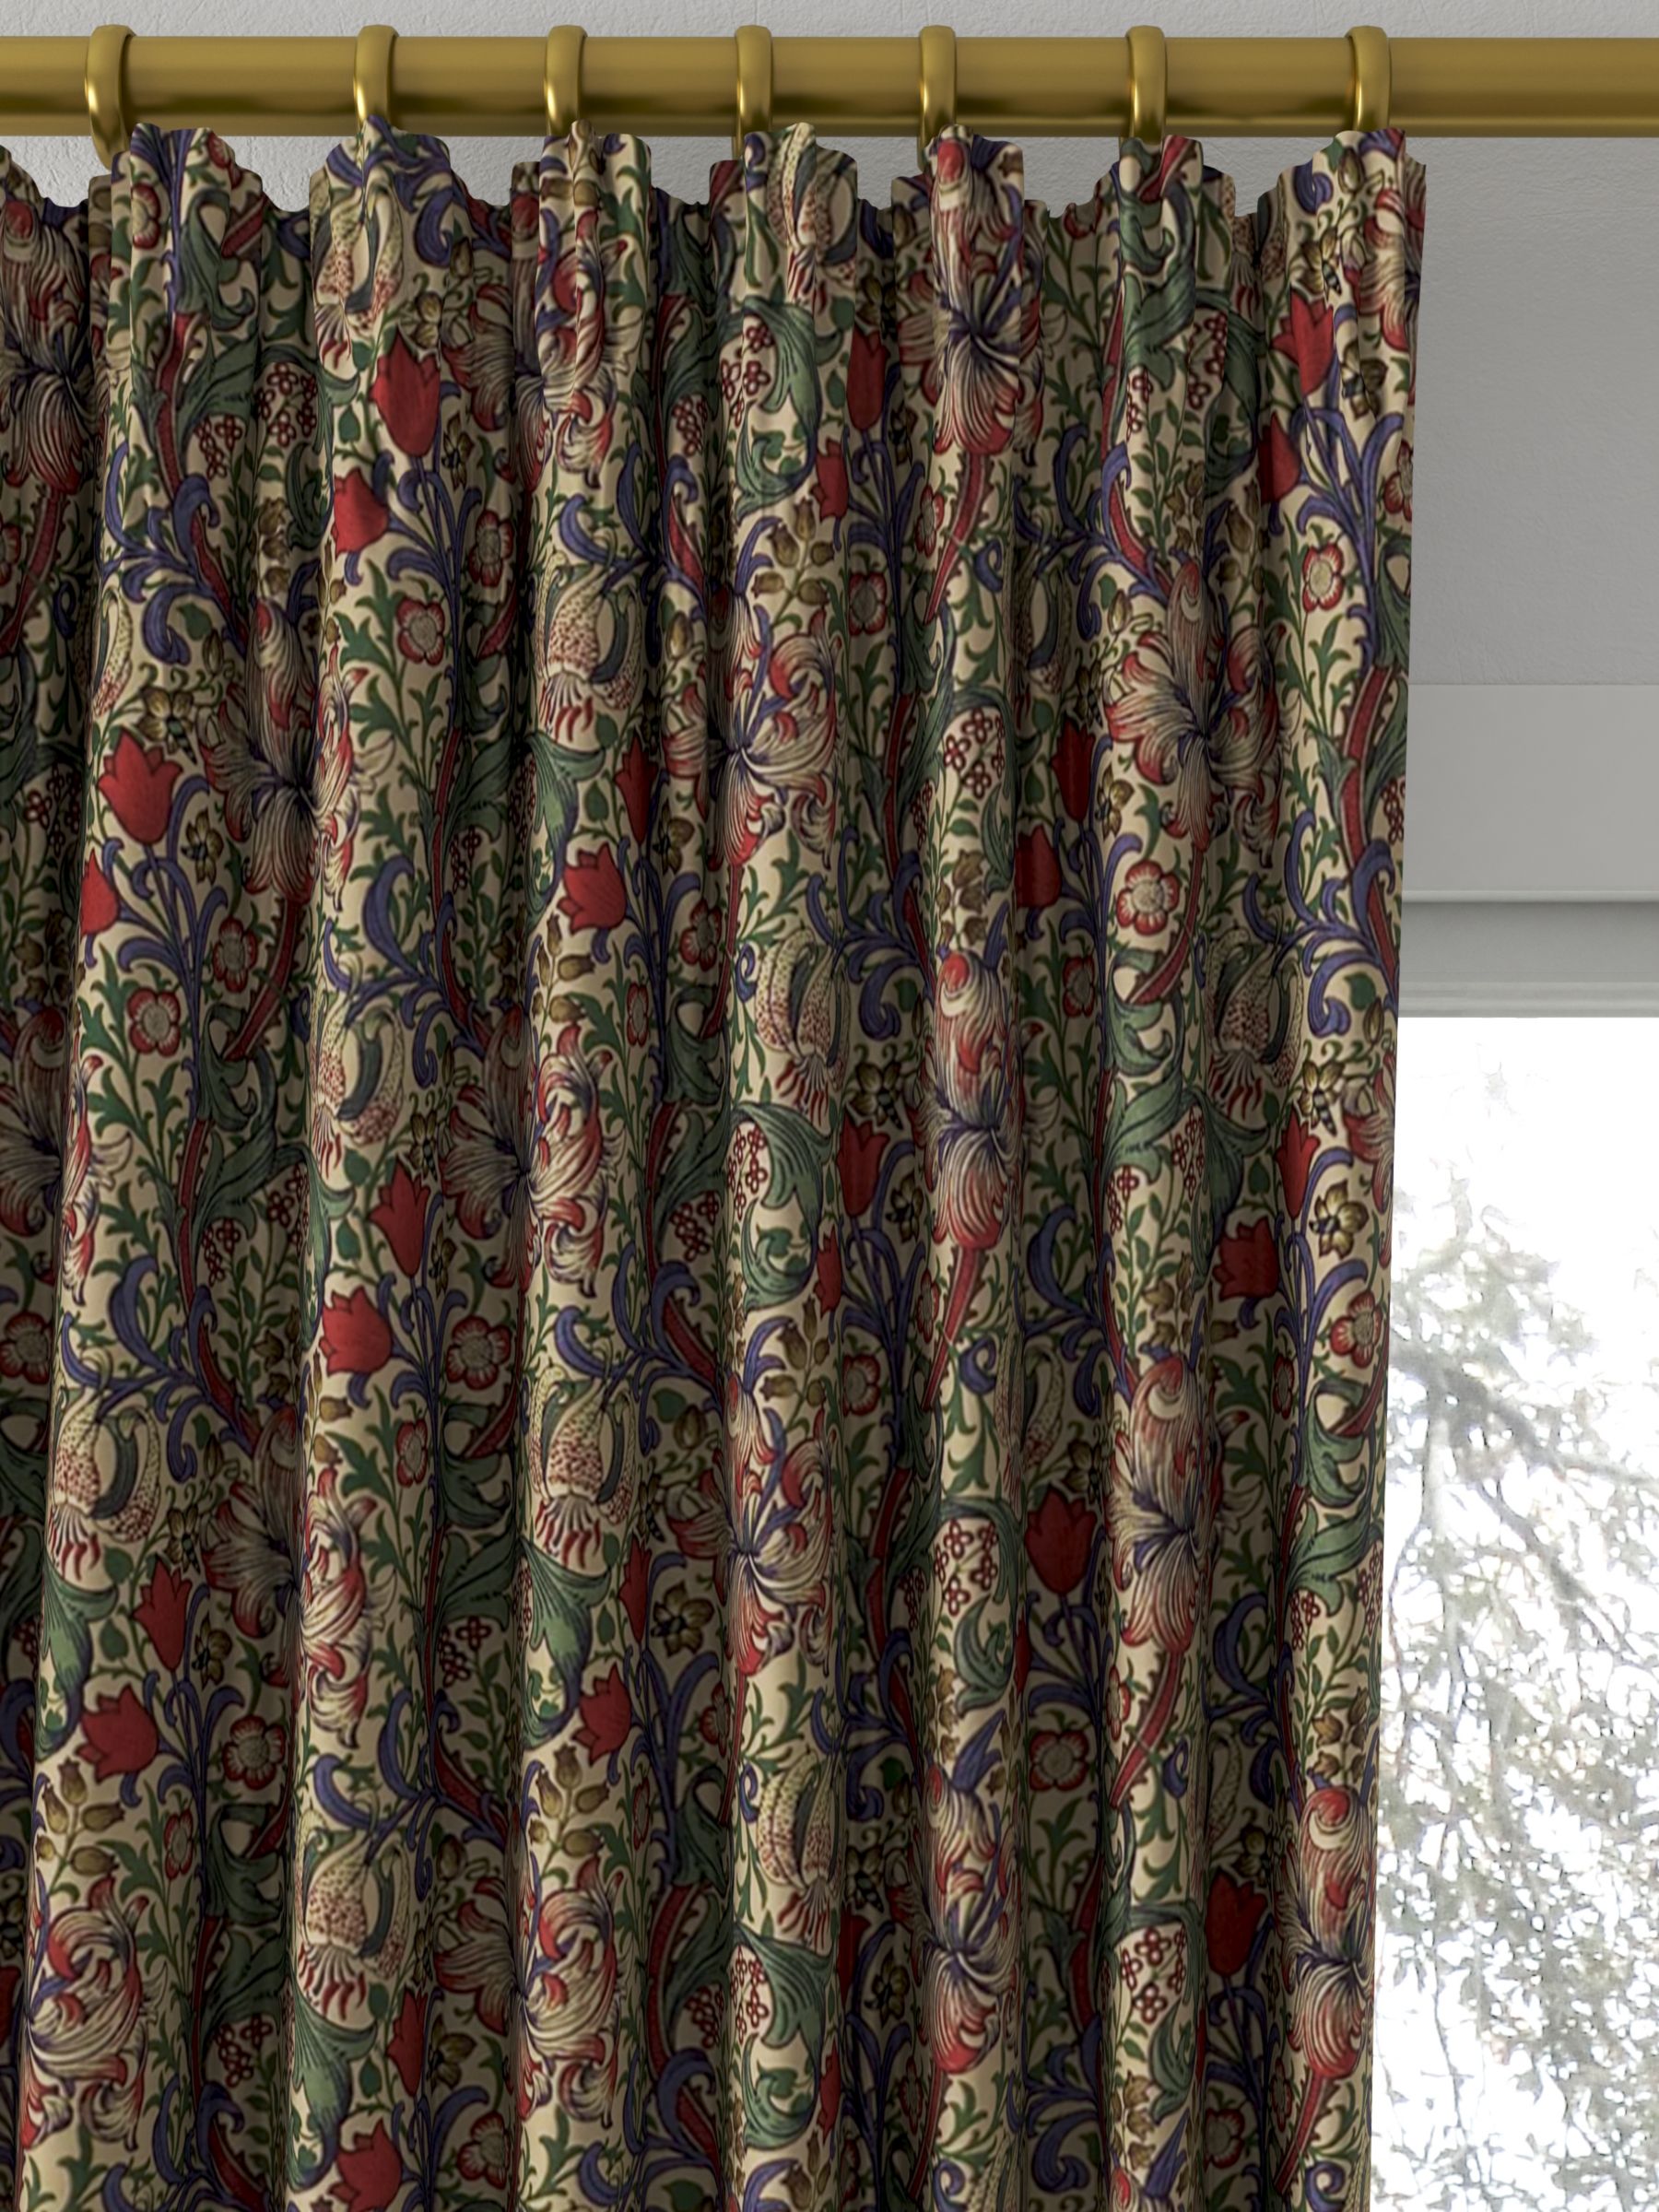 Morris & Co. Golden Lily Minor Made to Measure Curtains, Biscuit/Indigo/Red